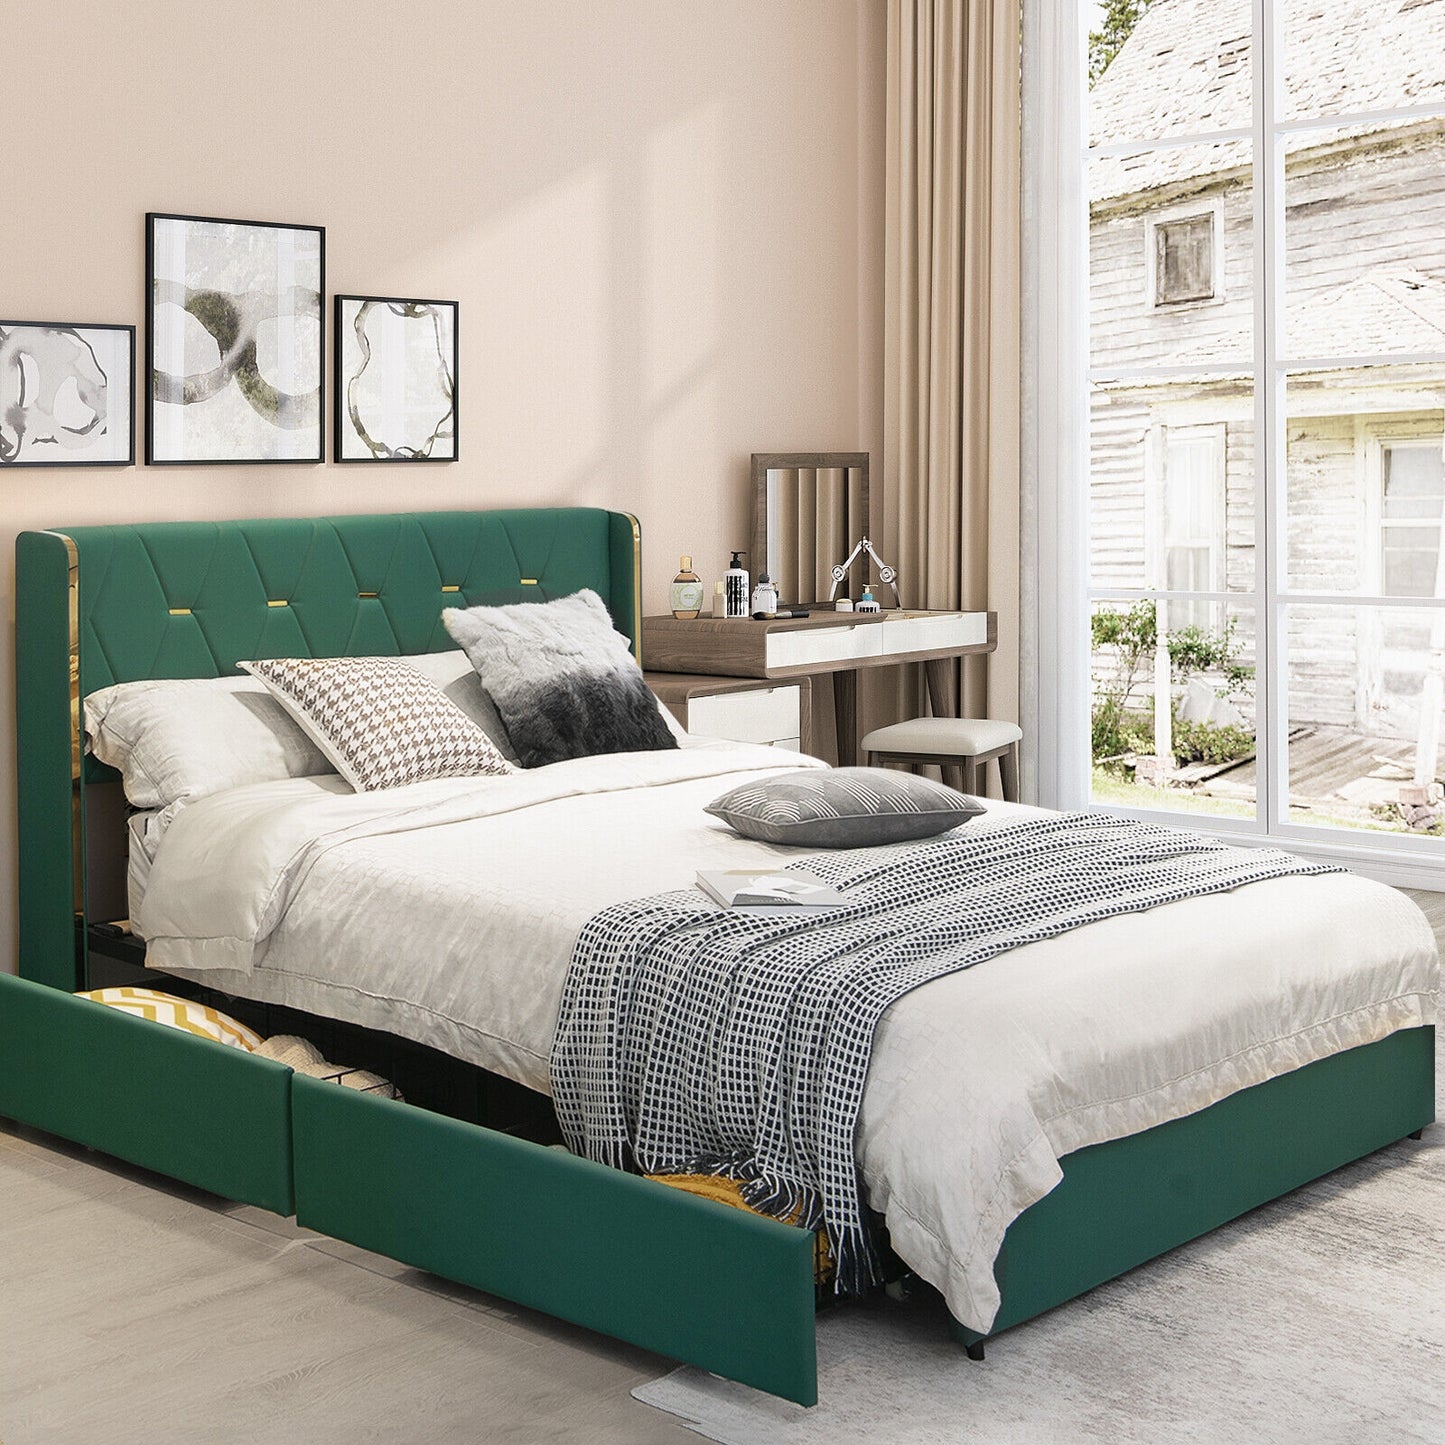 Full/Queen Size Upholstered Bed Frame with 4 Drawers-Green-Full Size